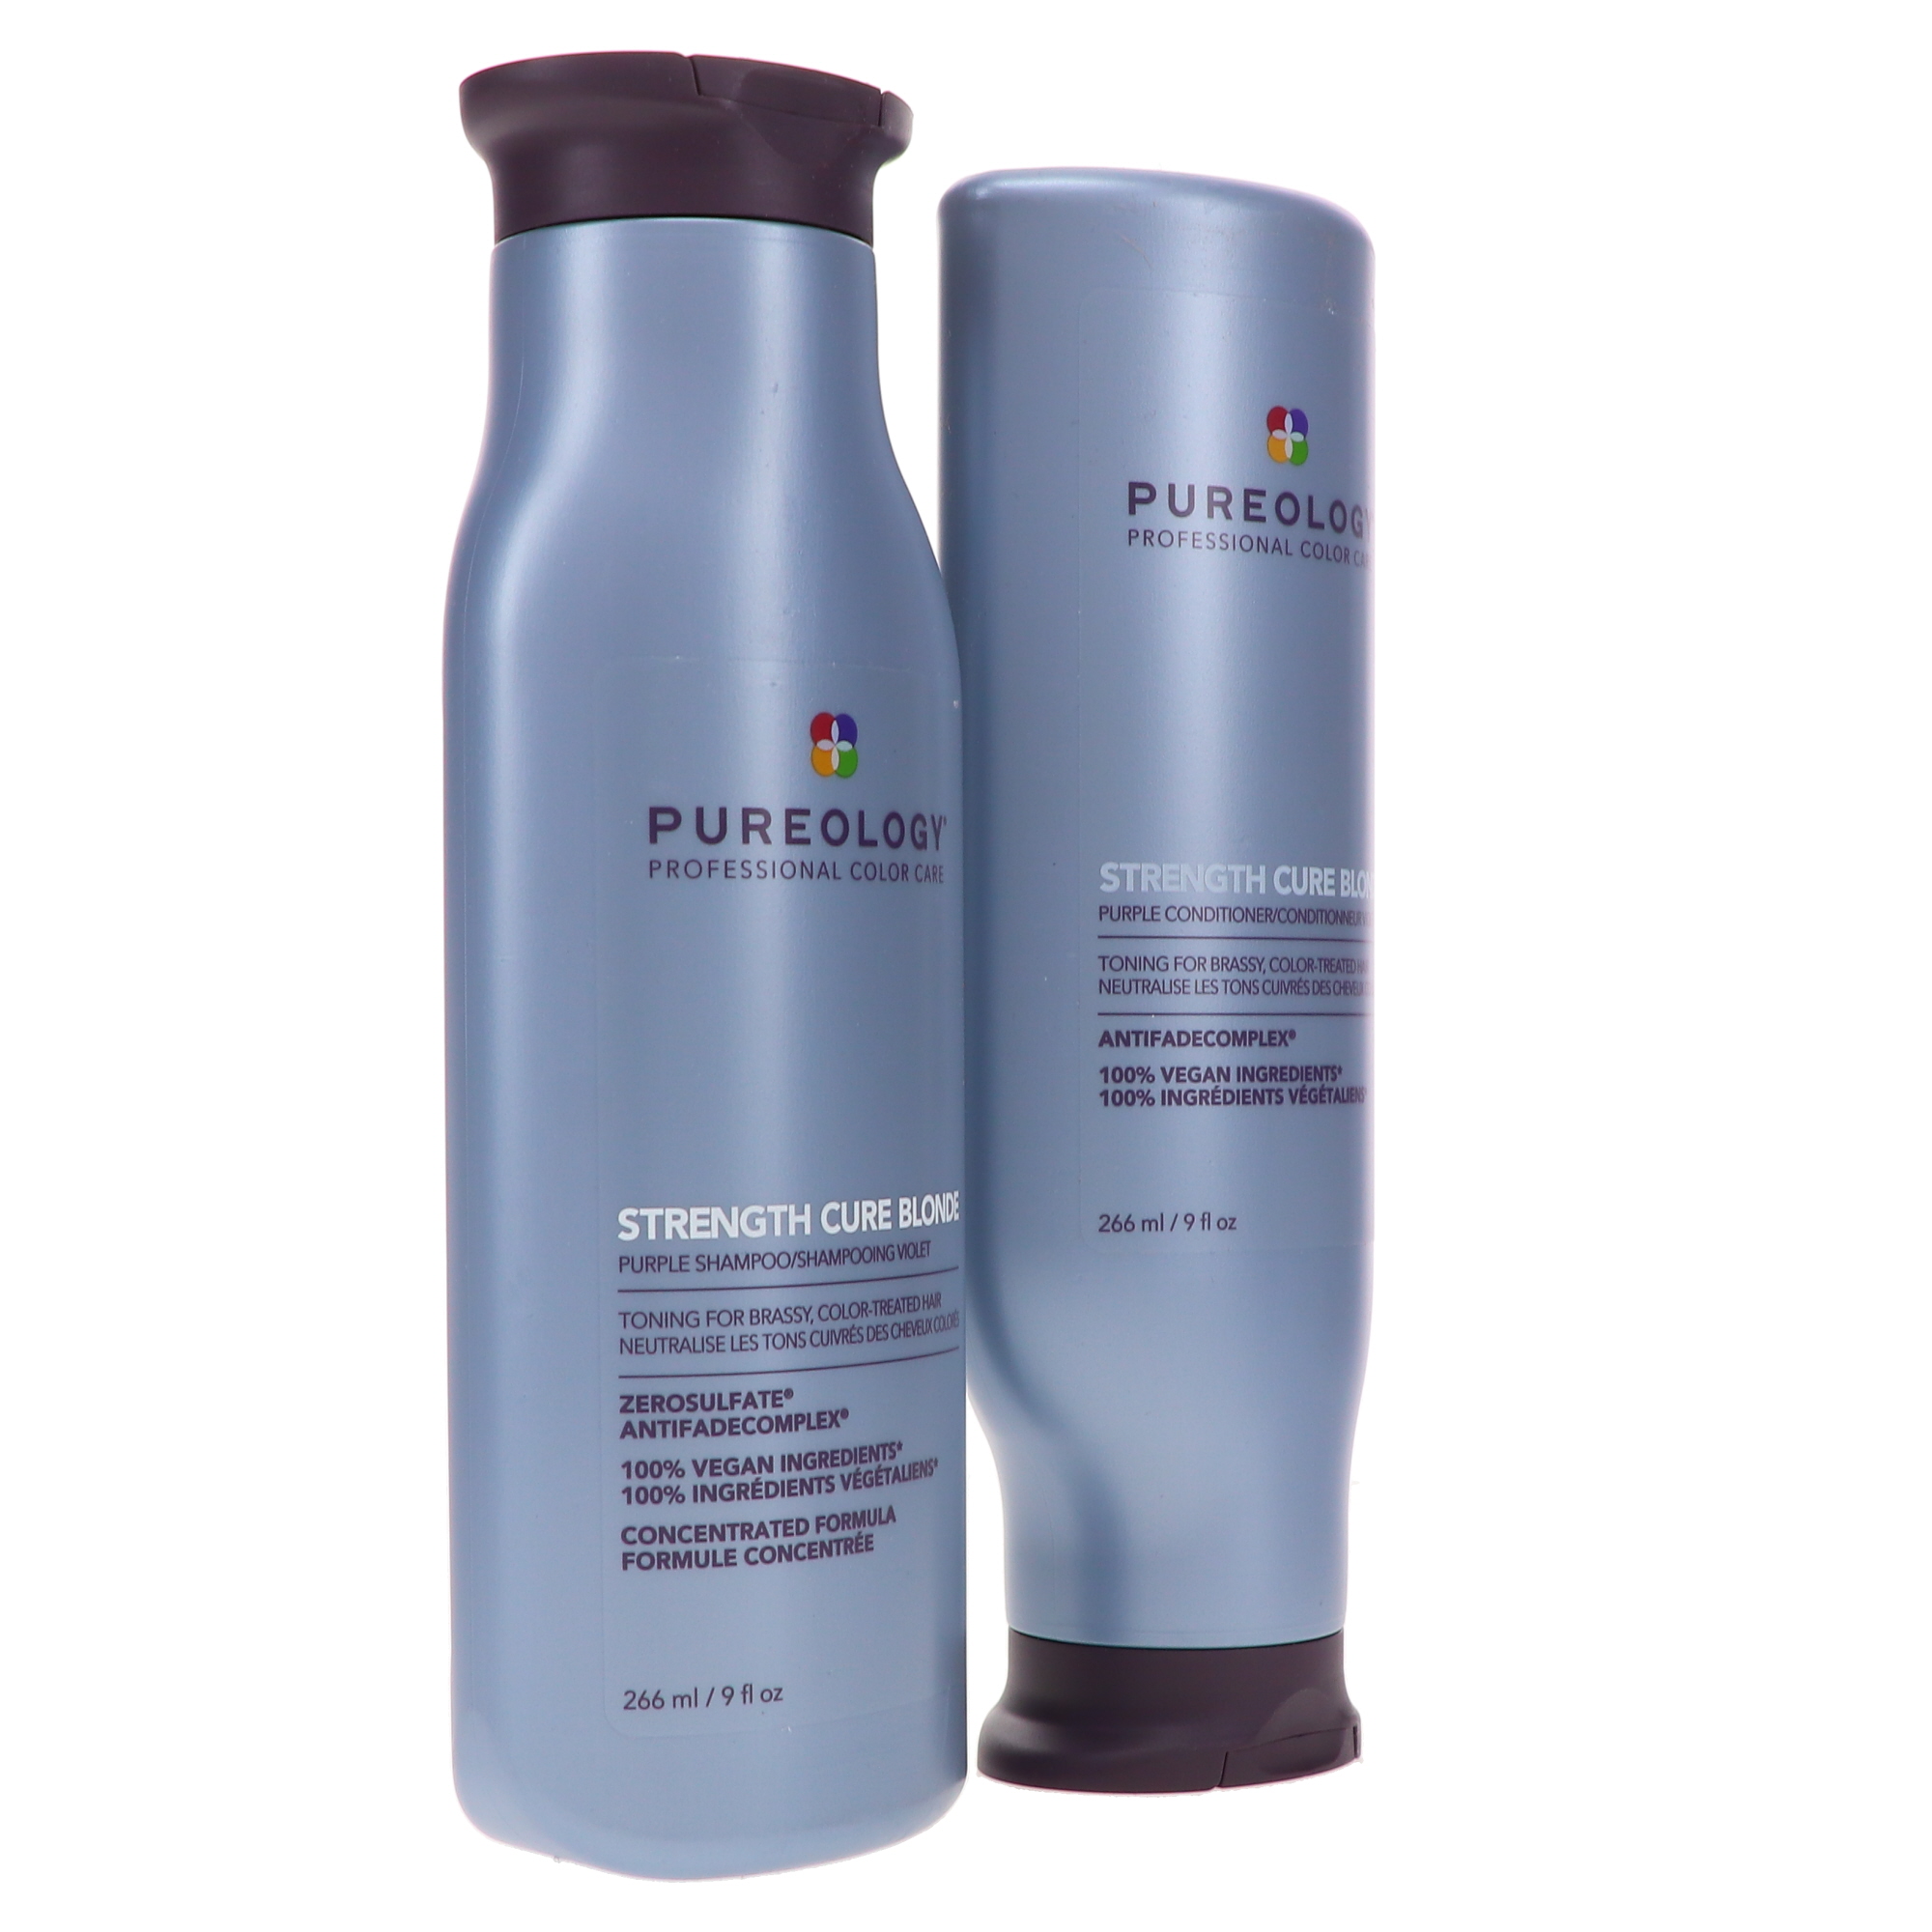 Pureology Strength Cure Best Blonde Shampoo 9 oz and Strength Cure Best ...